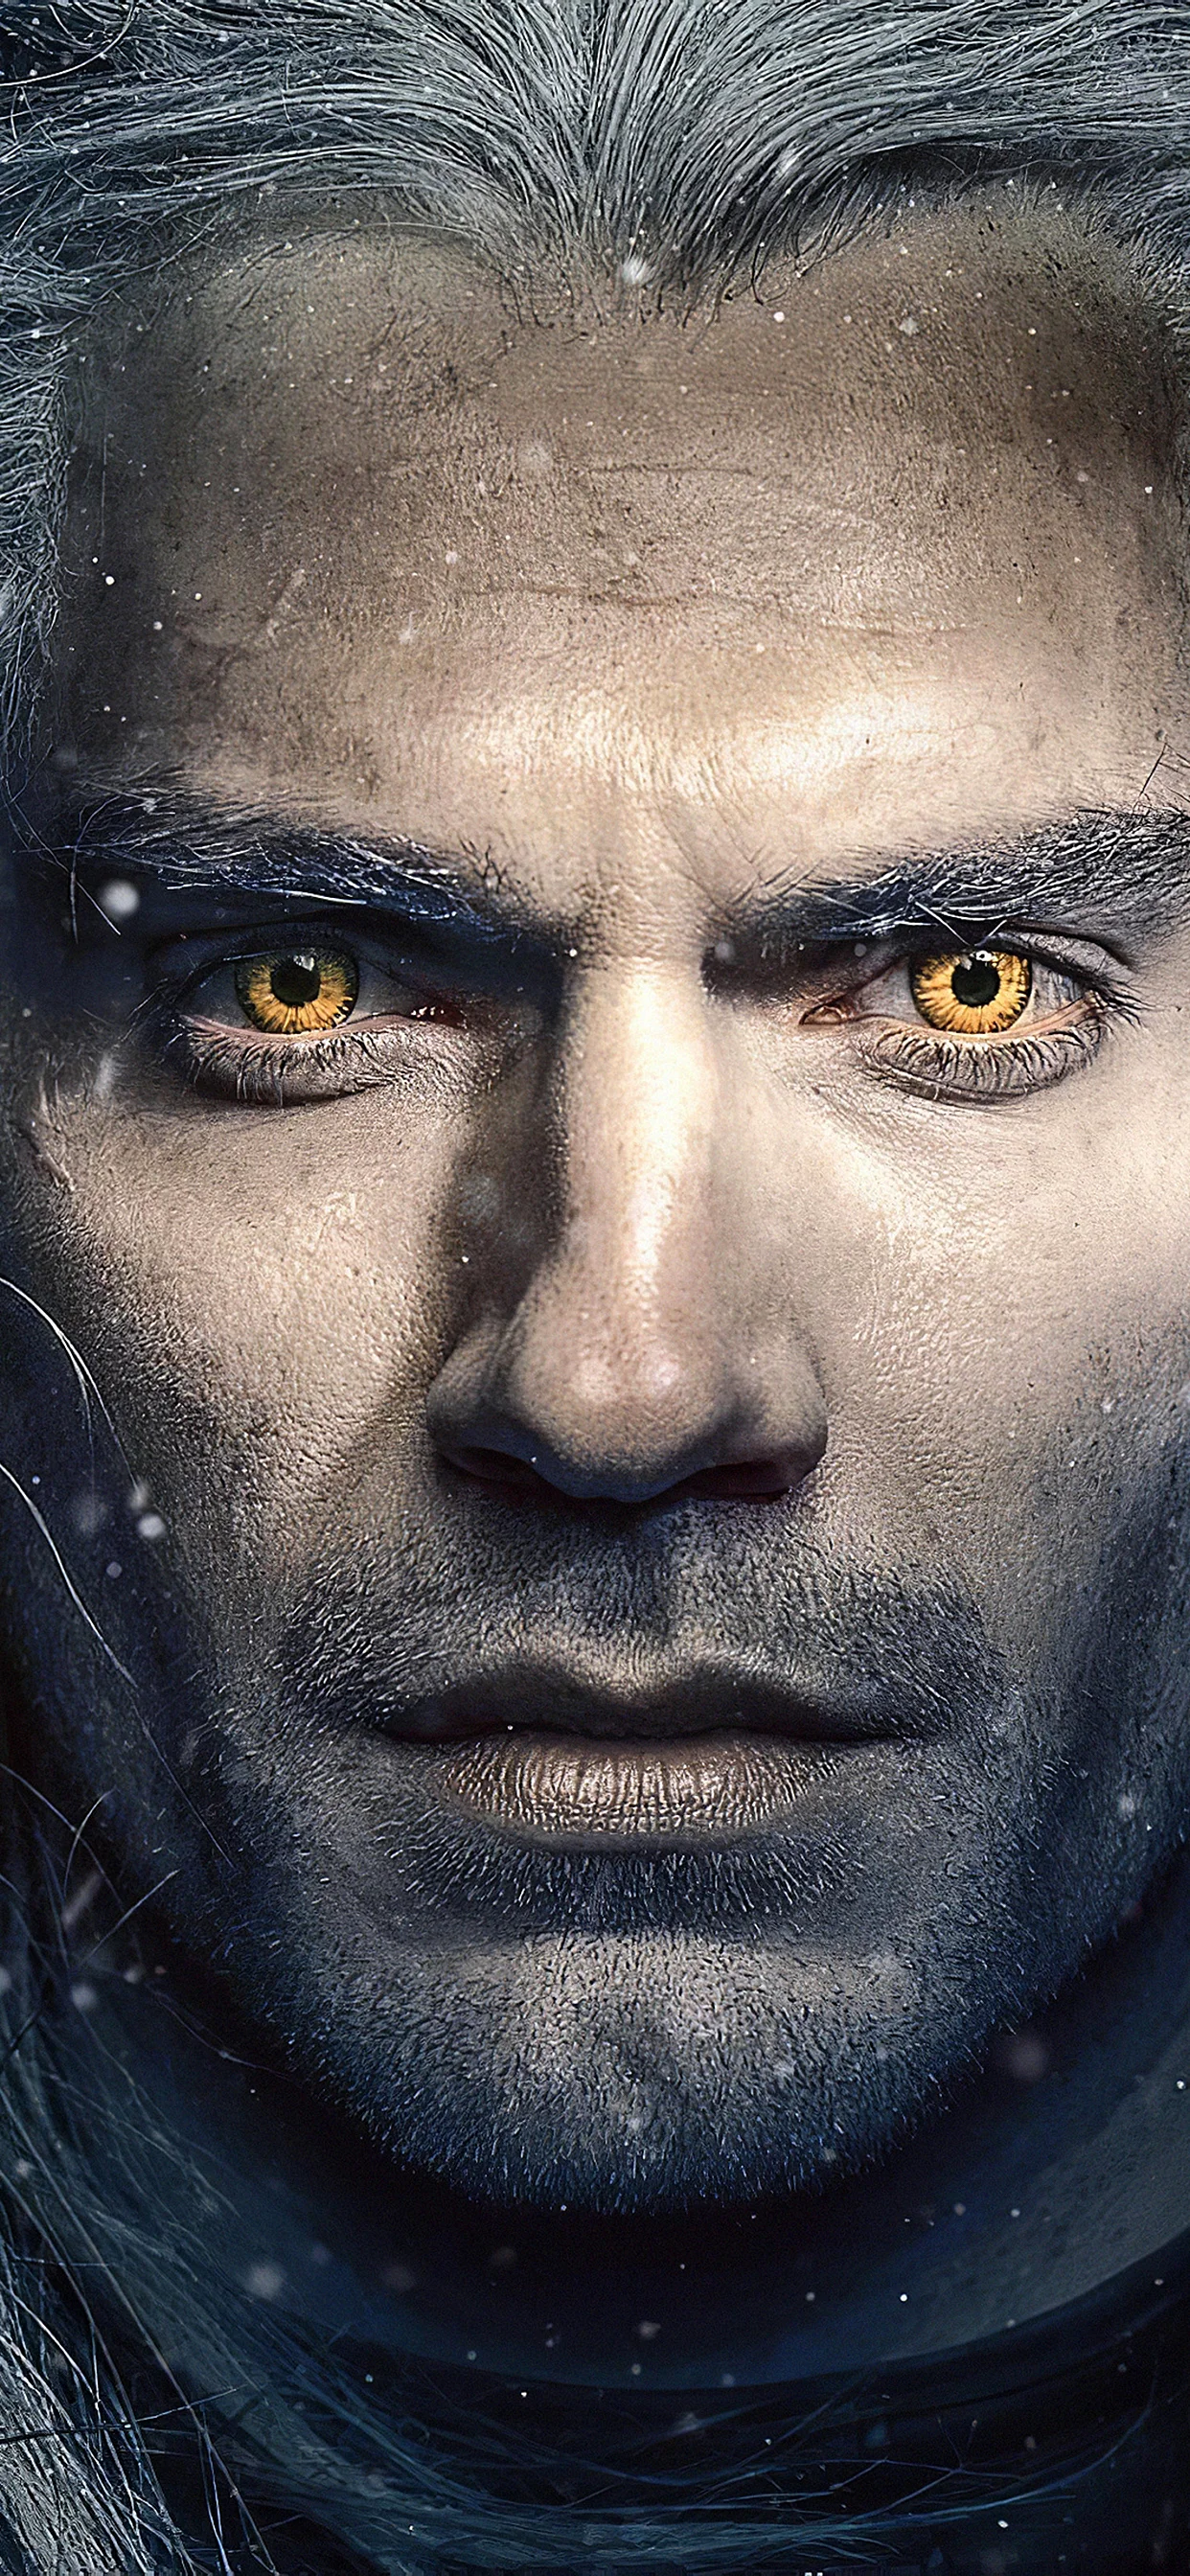 The Witcher Henry Cavill Wallpaper for iPhone 11 Pro Max